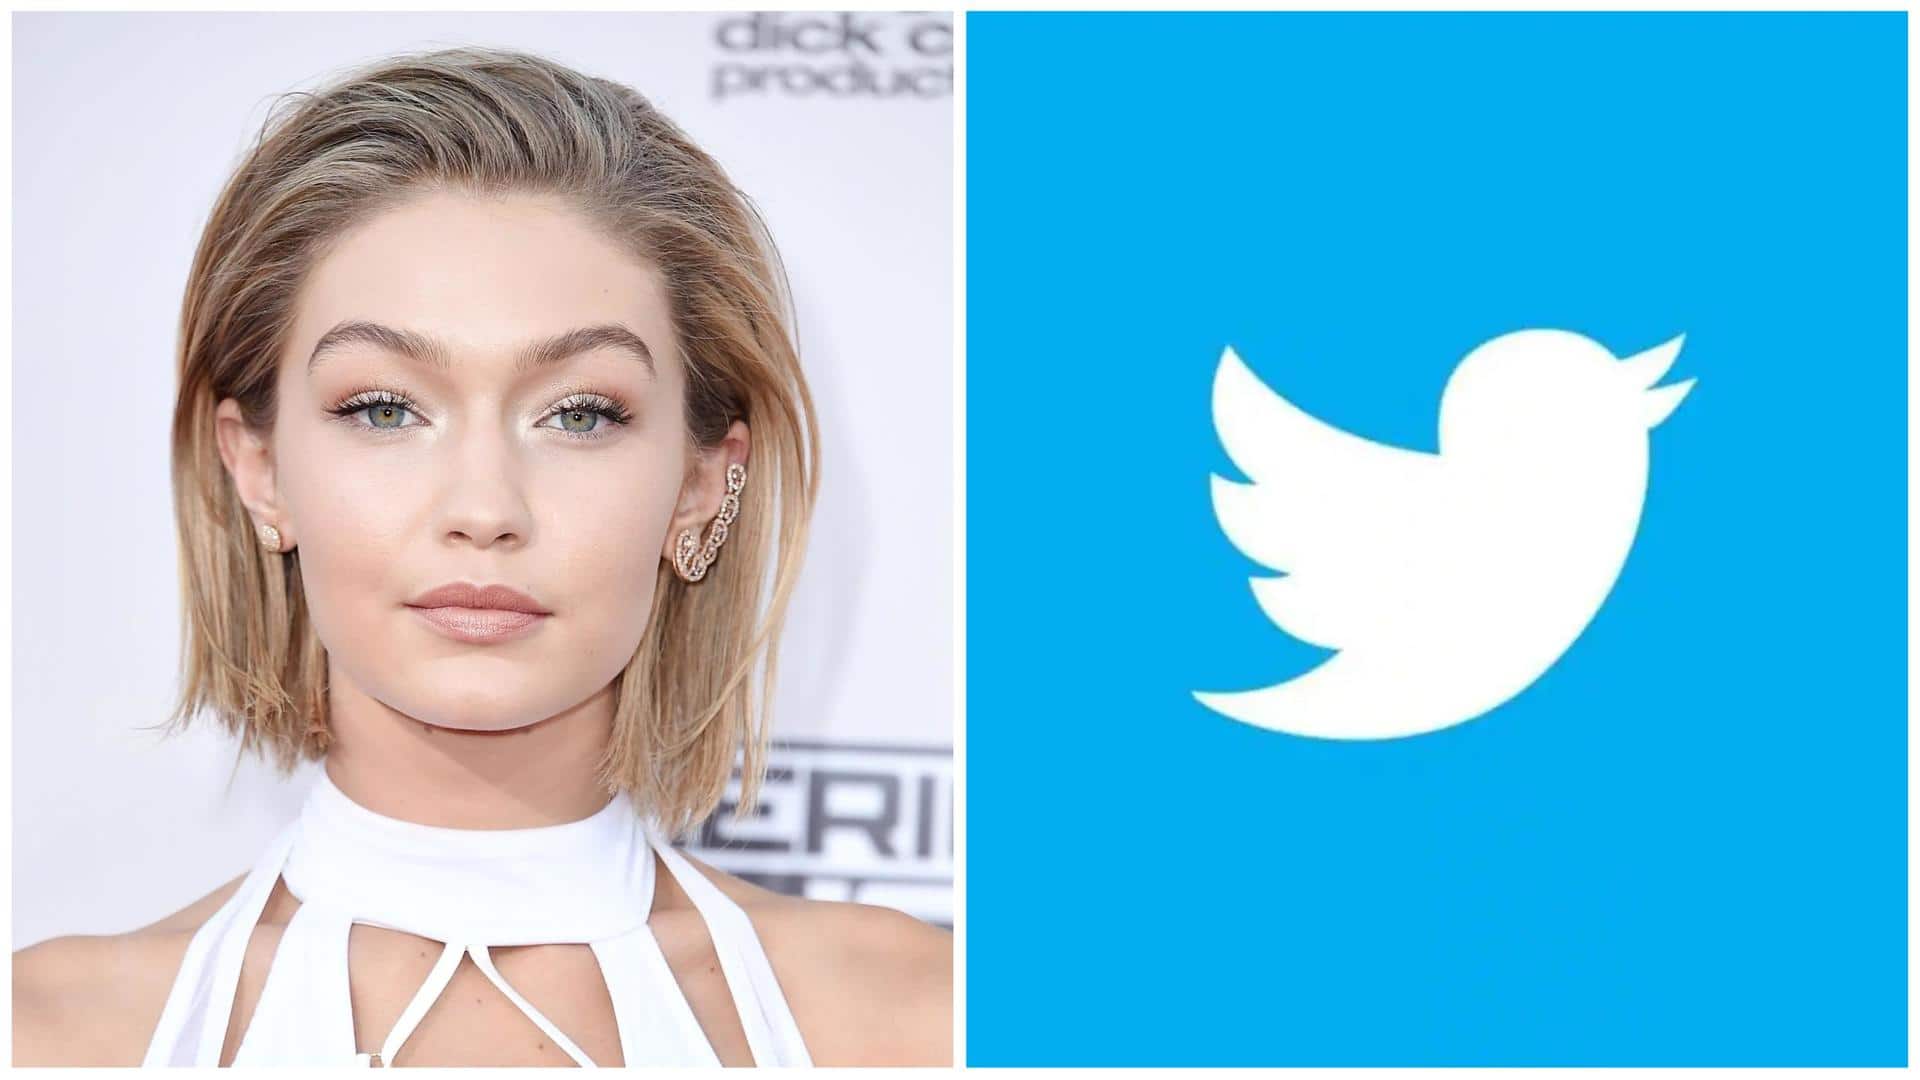 Gigi Hadid deactivates Twitter account after Elon Musk takeover